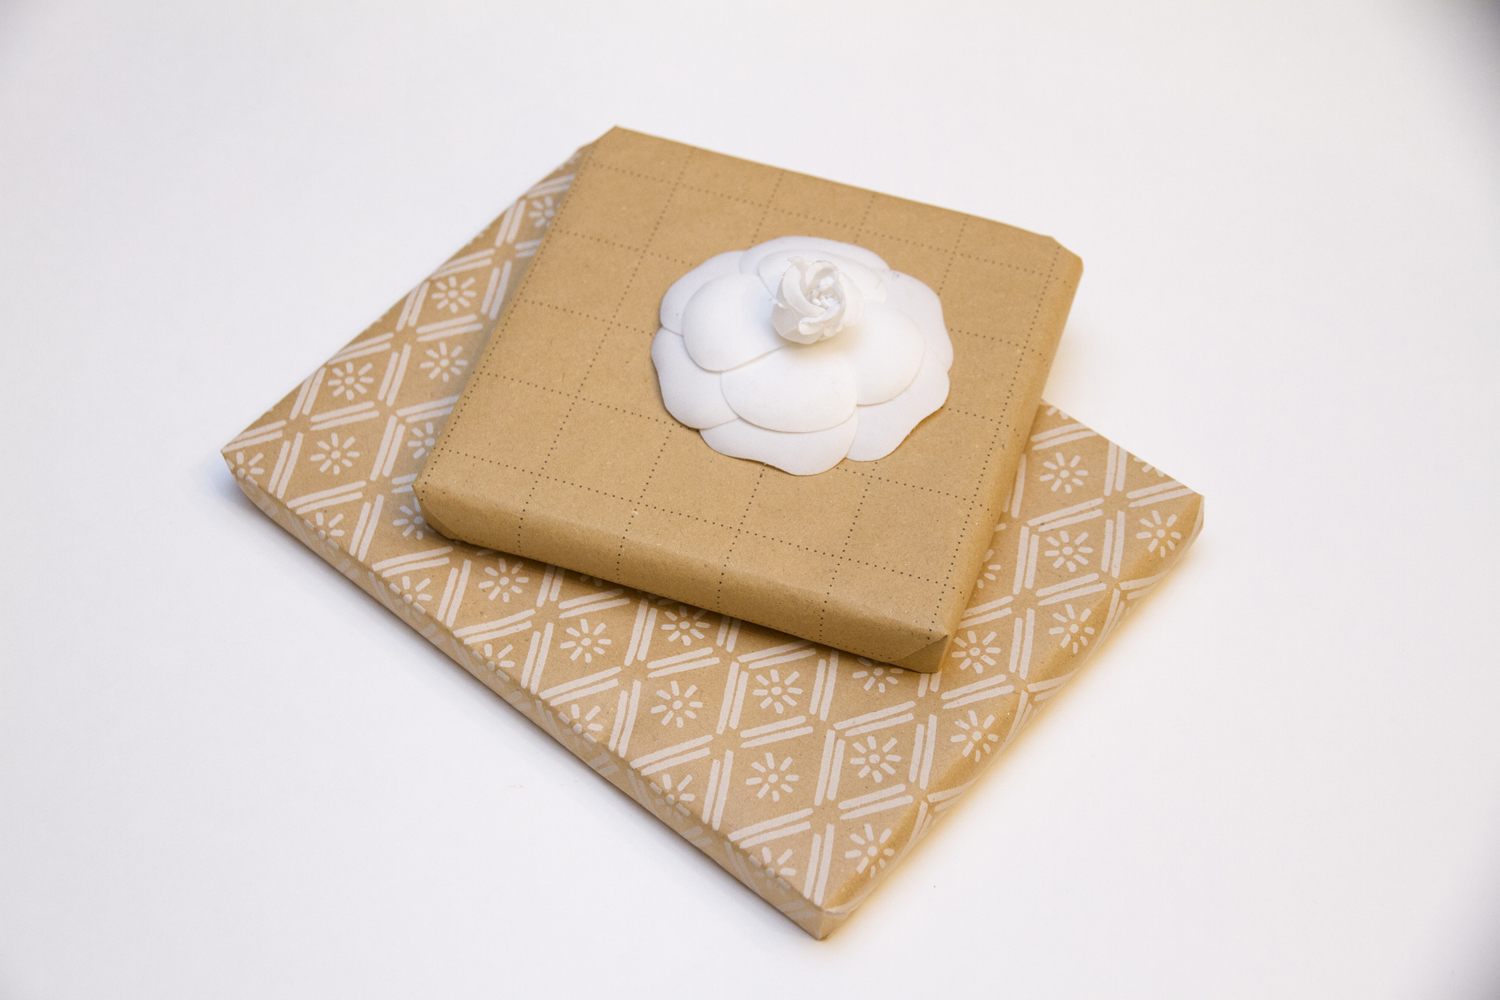 Presents wrapped in kraft paper